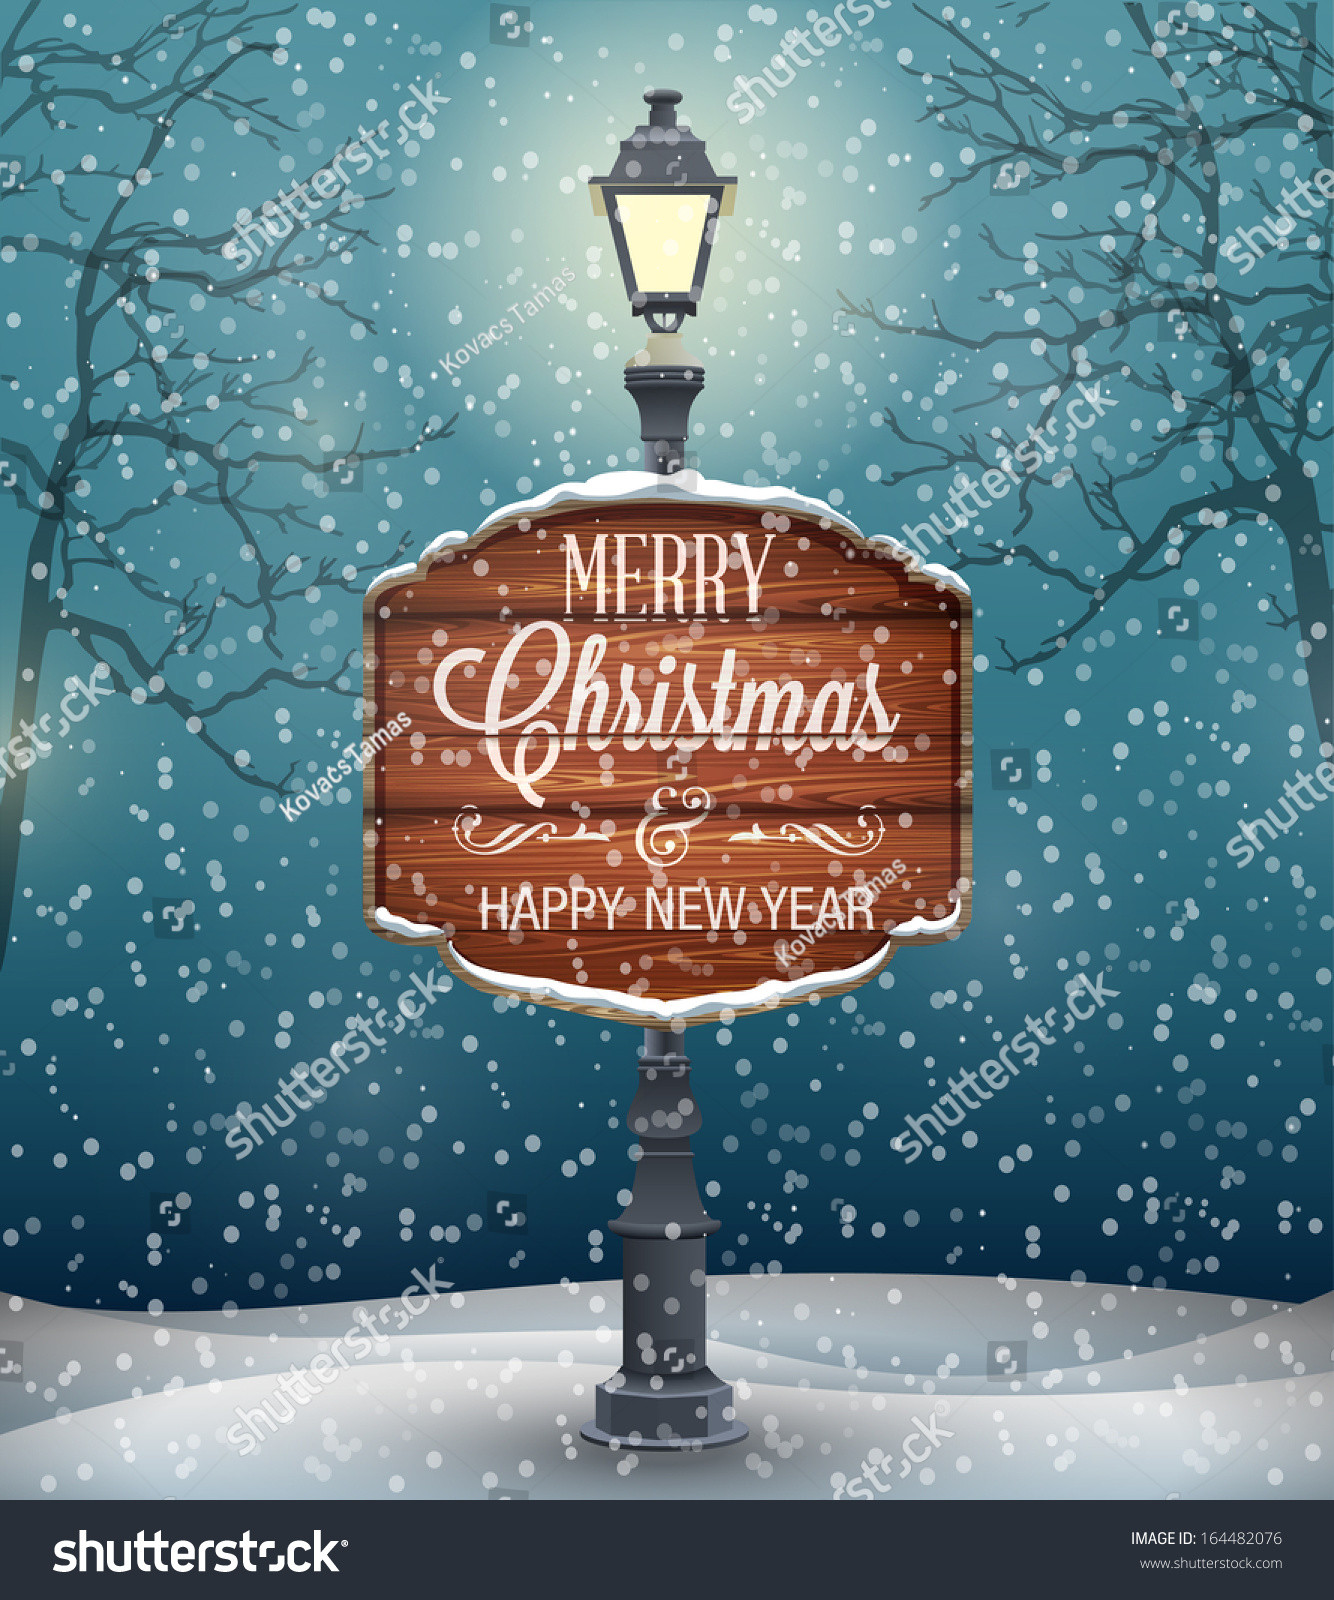 Christmas Lamp Post With Snow
 Signboard With Christmas Greeting Lamp Post Winter